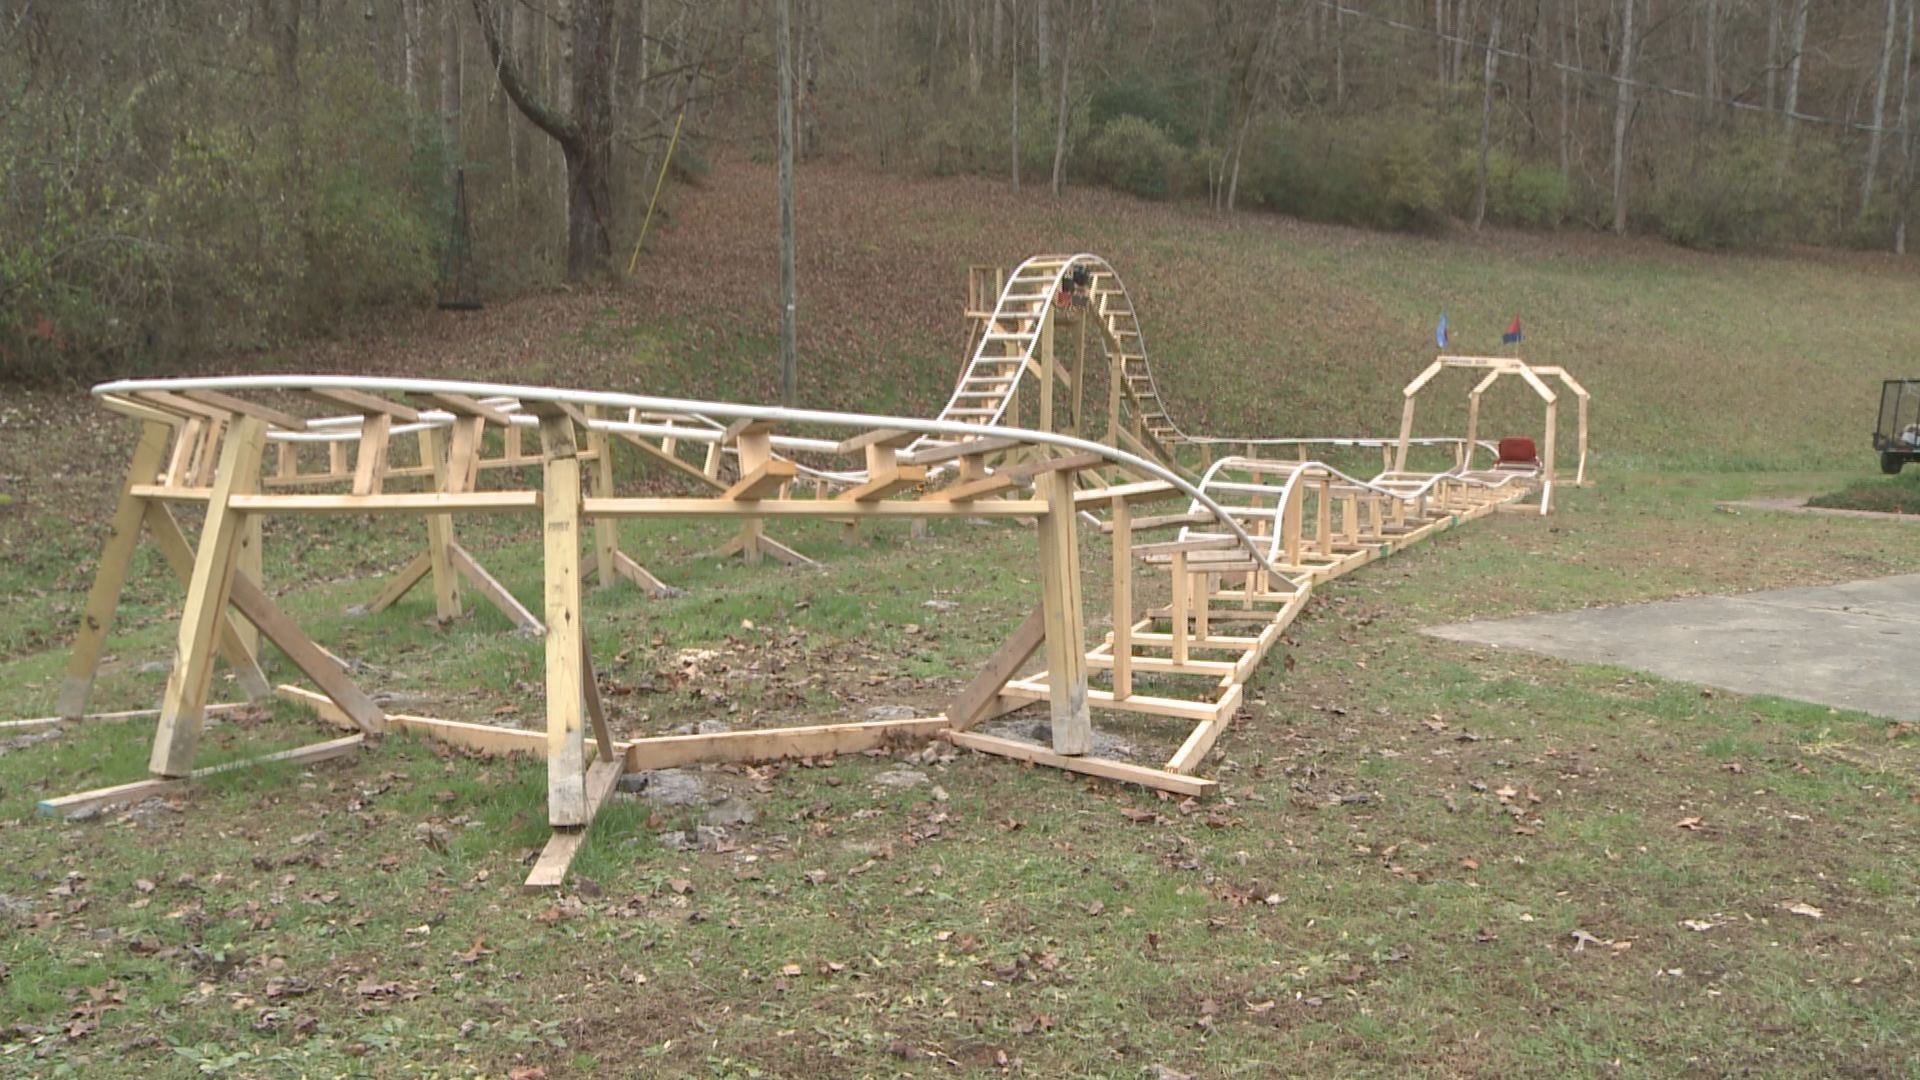 16 Year Old Builds Roller Coaster In Backyard